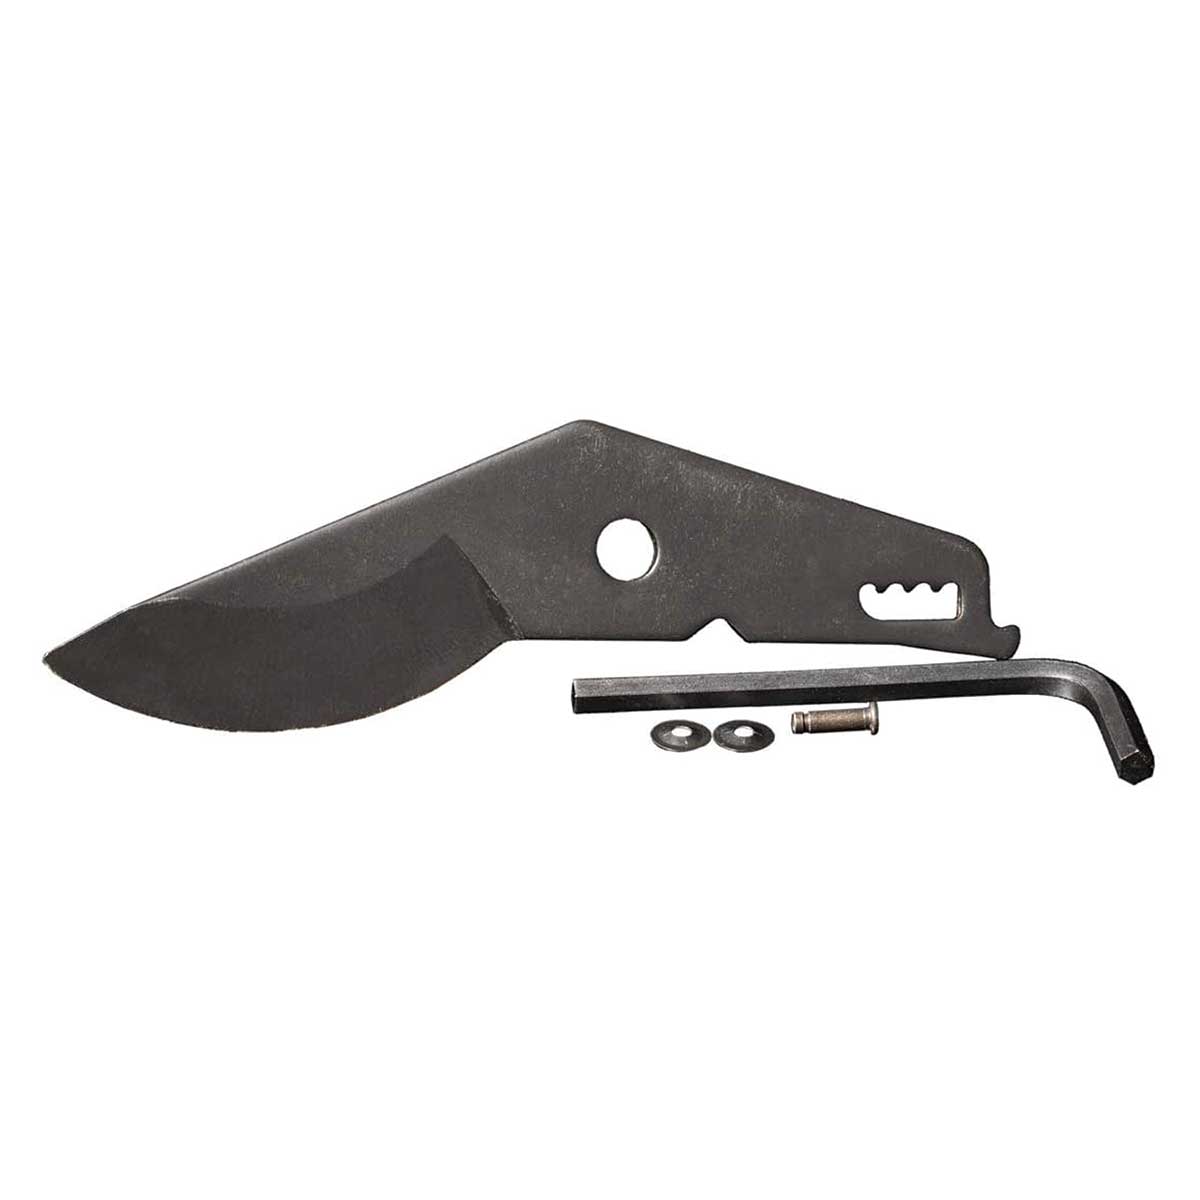 EZ Kut Replacement Blade Kit for 8"L Ratcheting Hand Pruner